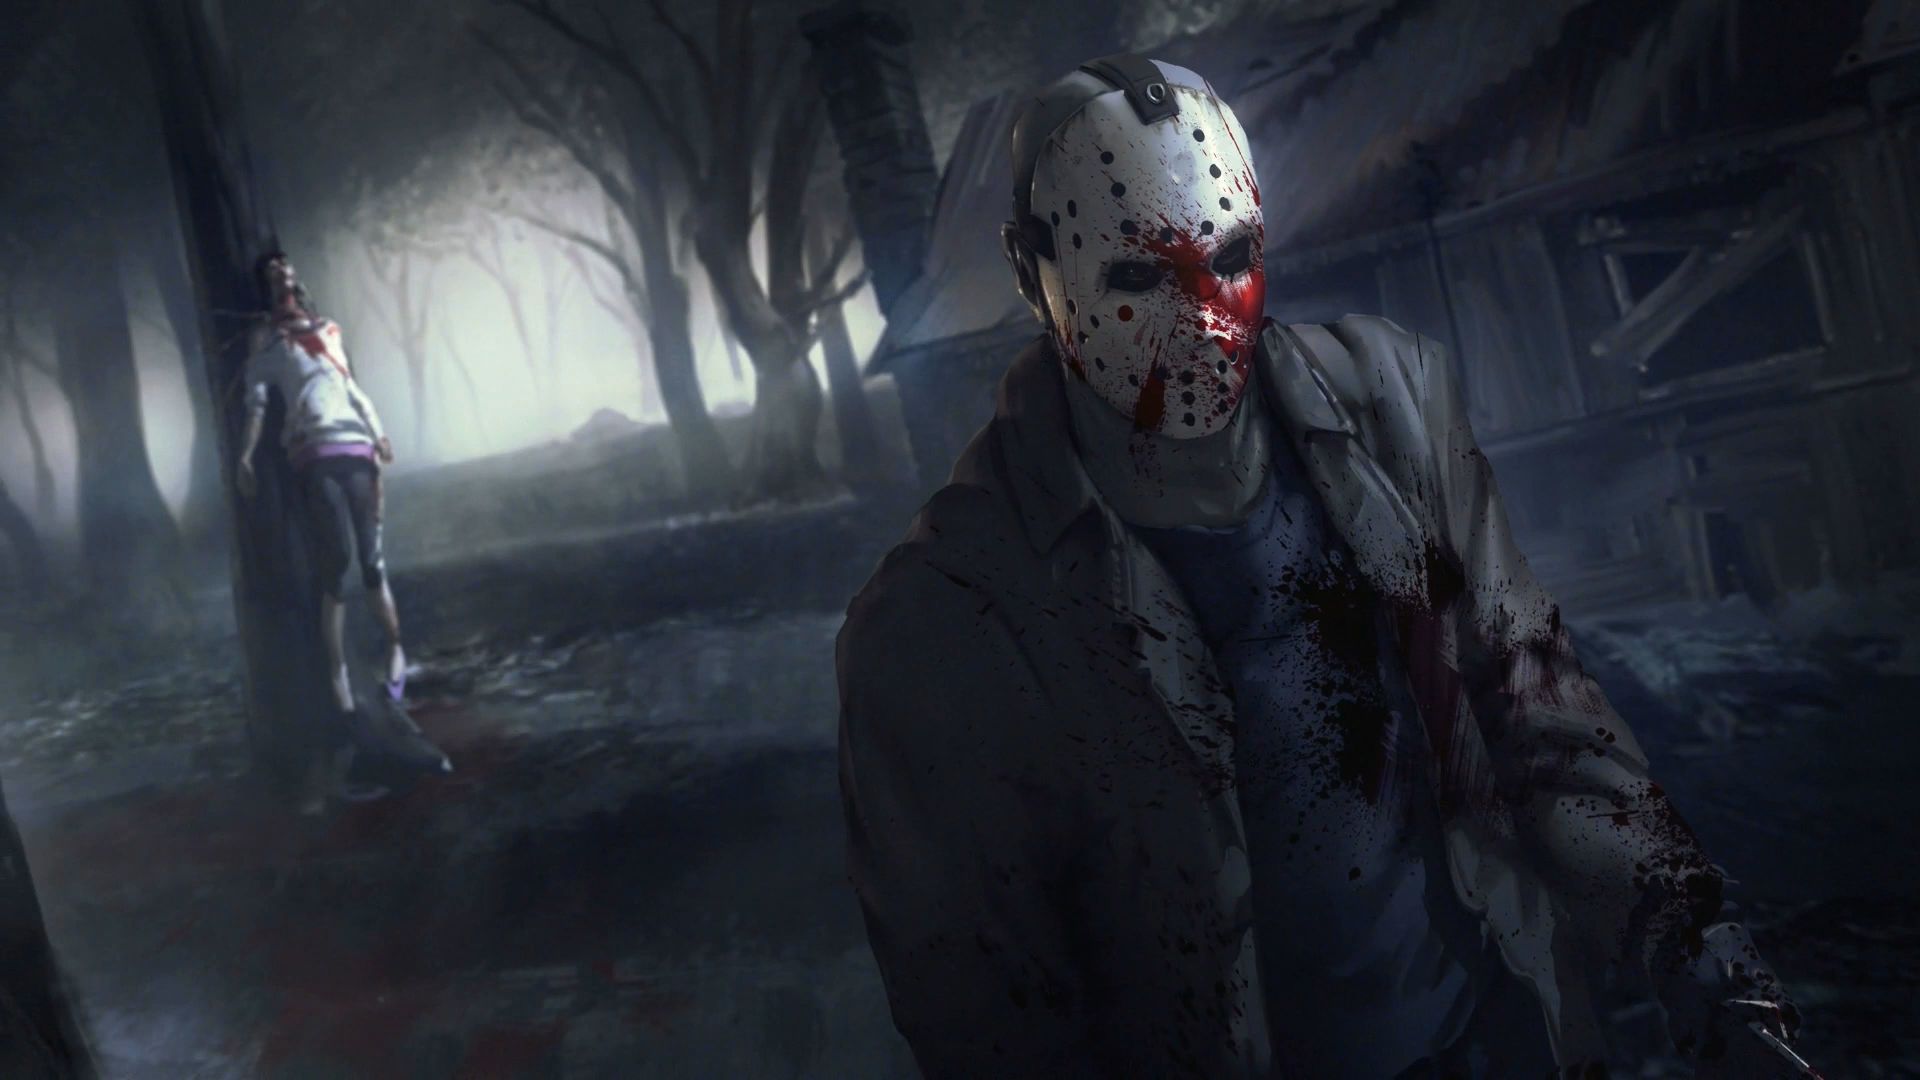 jason voorhees, video game, friday the 13th: the game, friday the 13th